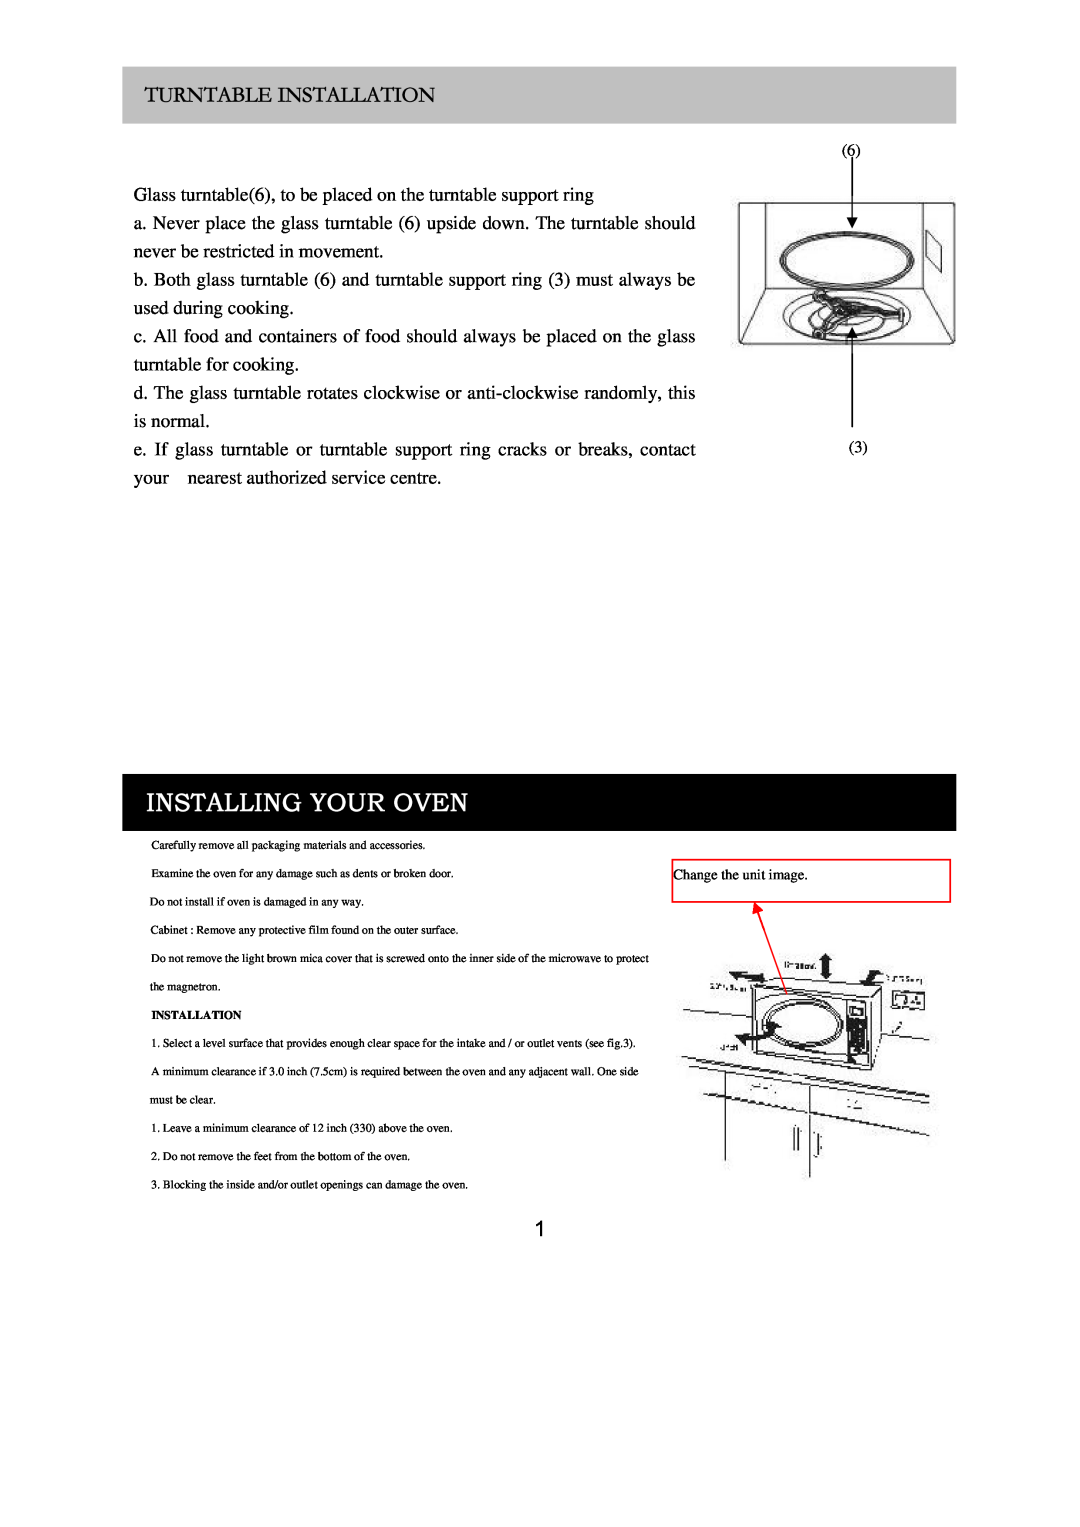 Russell Hobbs RHM2018 user manual Installing Your Oven, Turntable Installation 